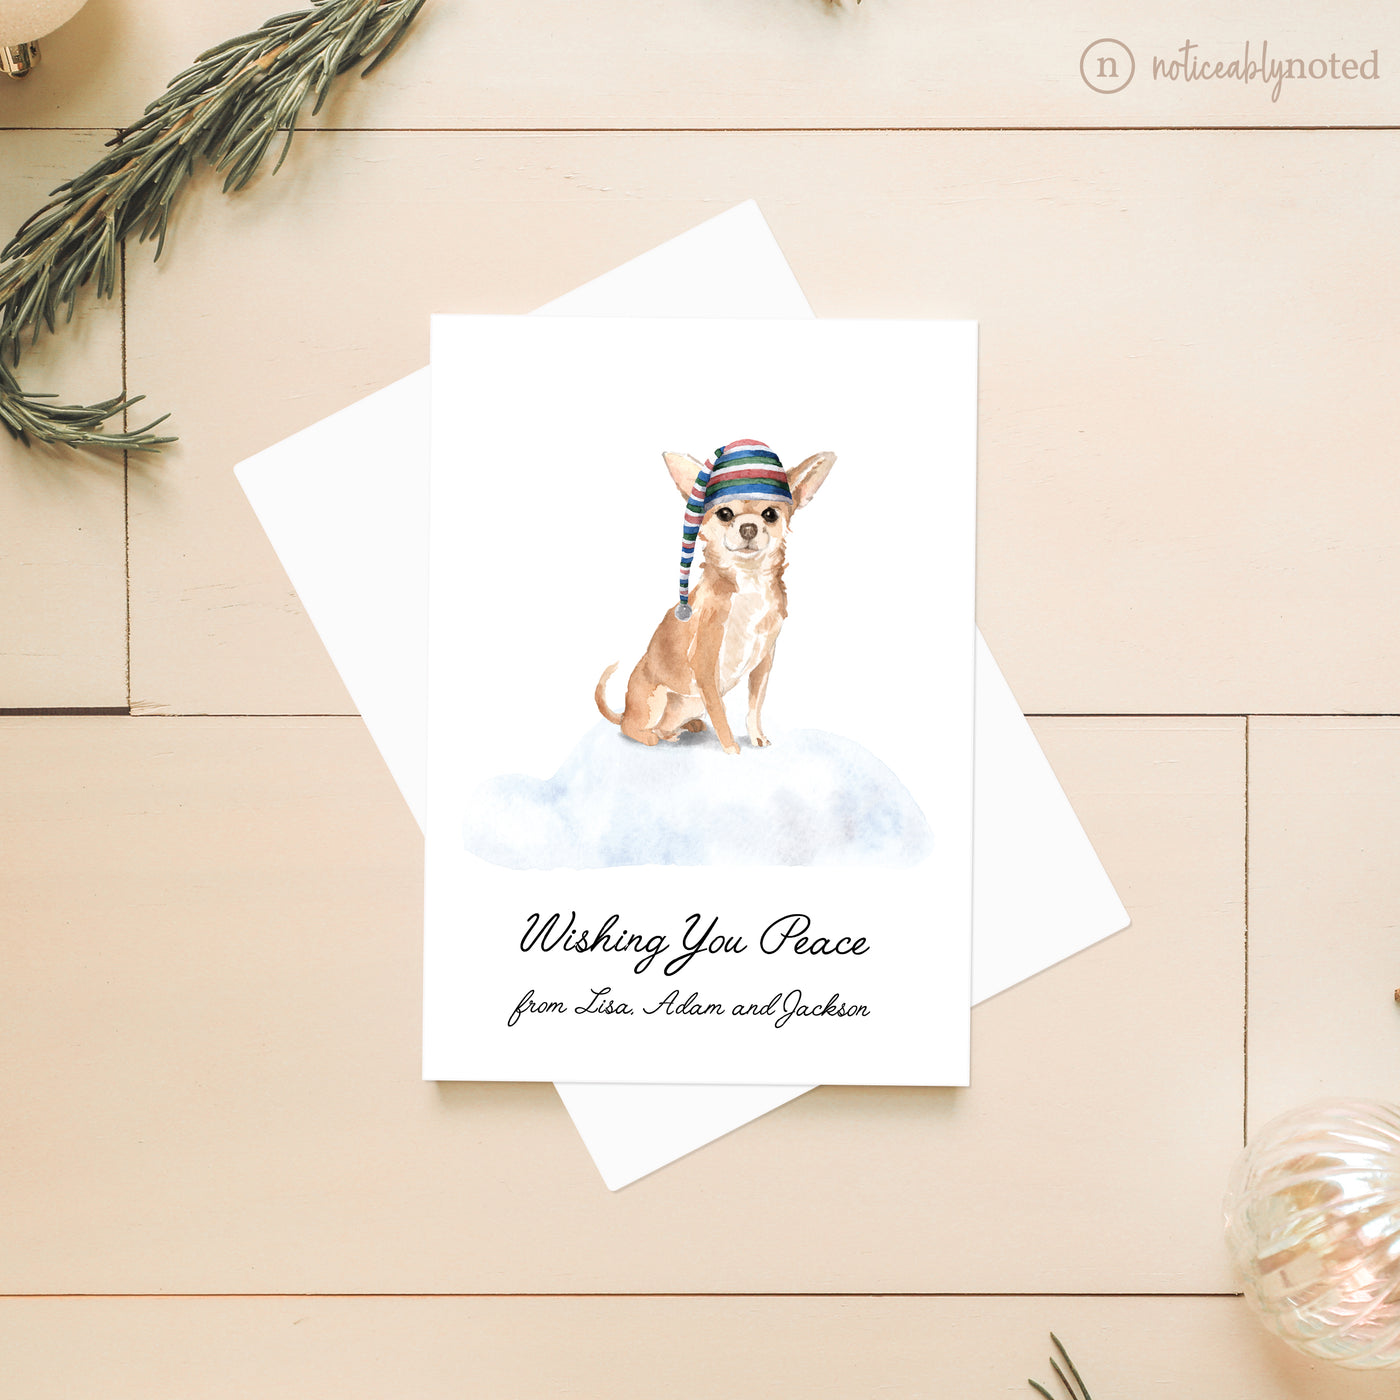 Chihuahua Dog Christmas Cards | Noticeably Noted